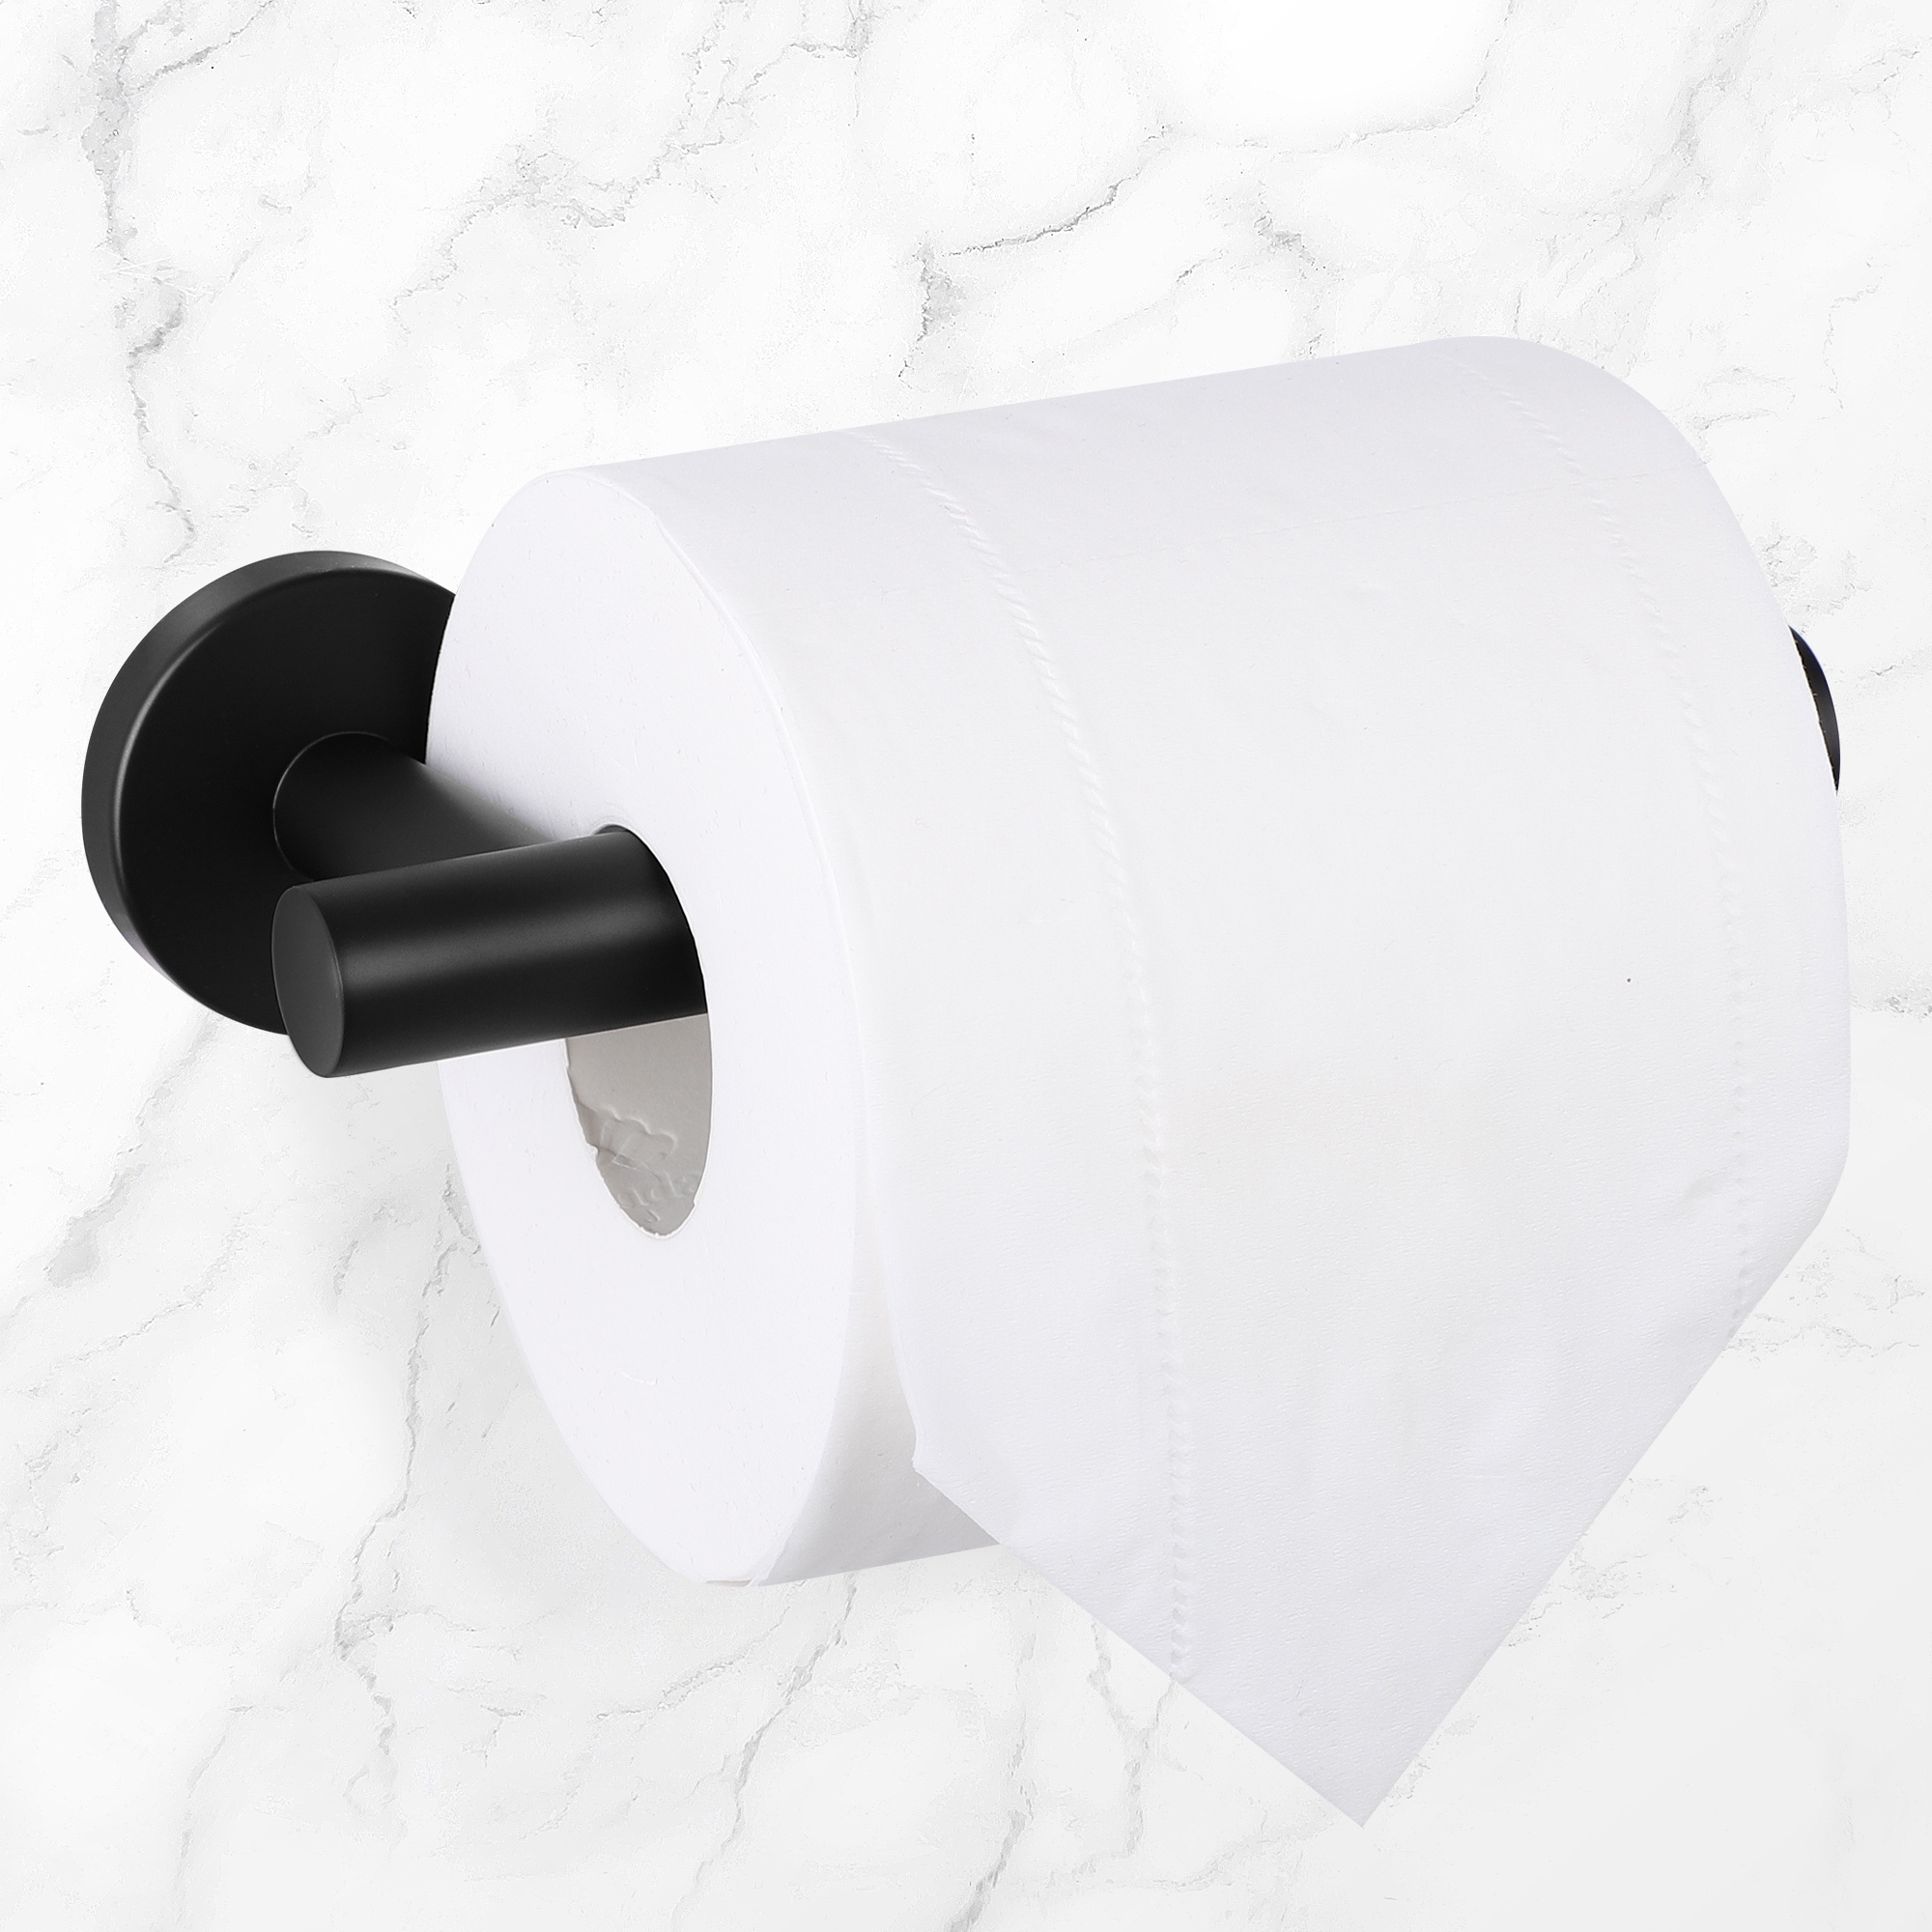 https://ak1.ostkcdn.com/images/products/is/images/direct/b7c501bd23981f70c542d6291217aa5e5e56a90b/Toilet-Paper-Holder-Towel-Tissue-Holder-for-Bathroom-Stainless-Steel.jpg